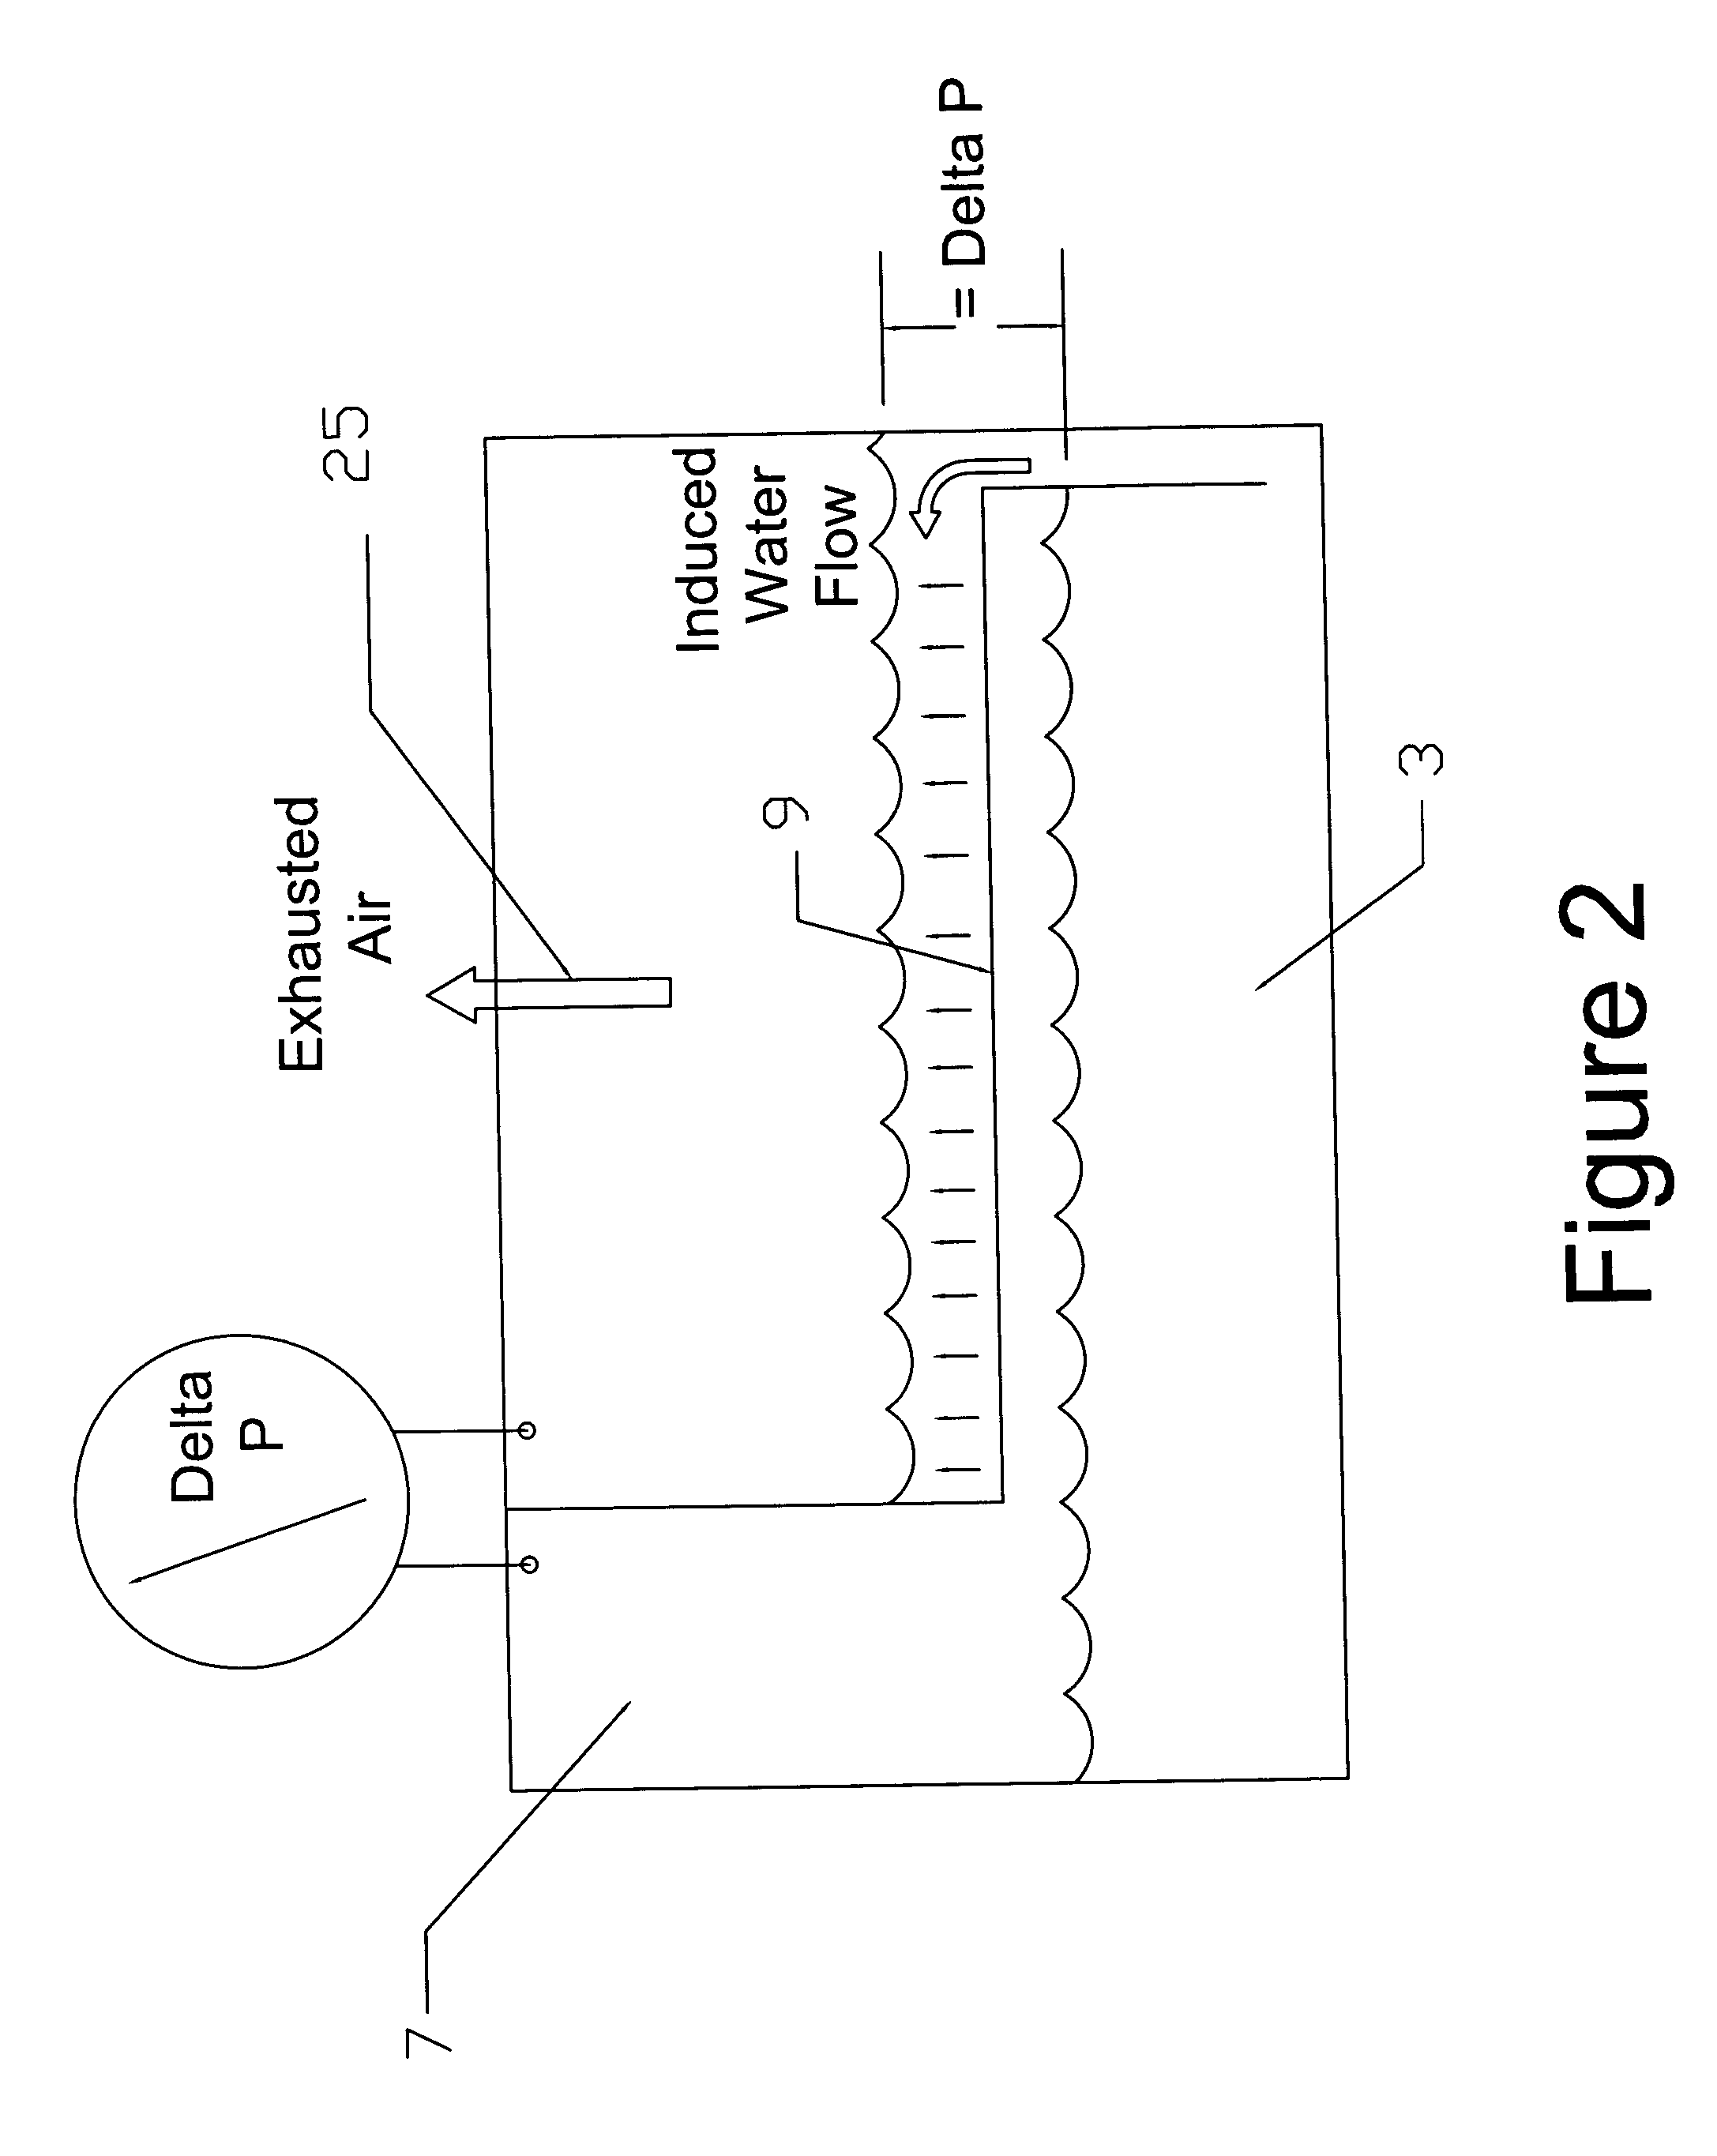 Apparatus for removing particulates from a gas stream